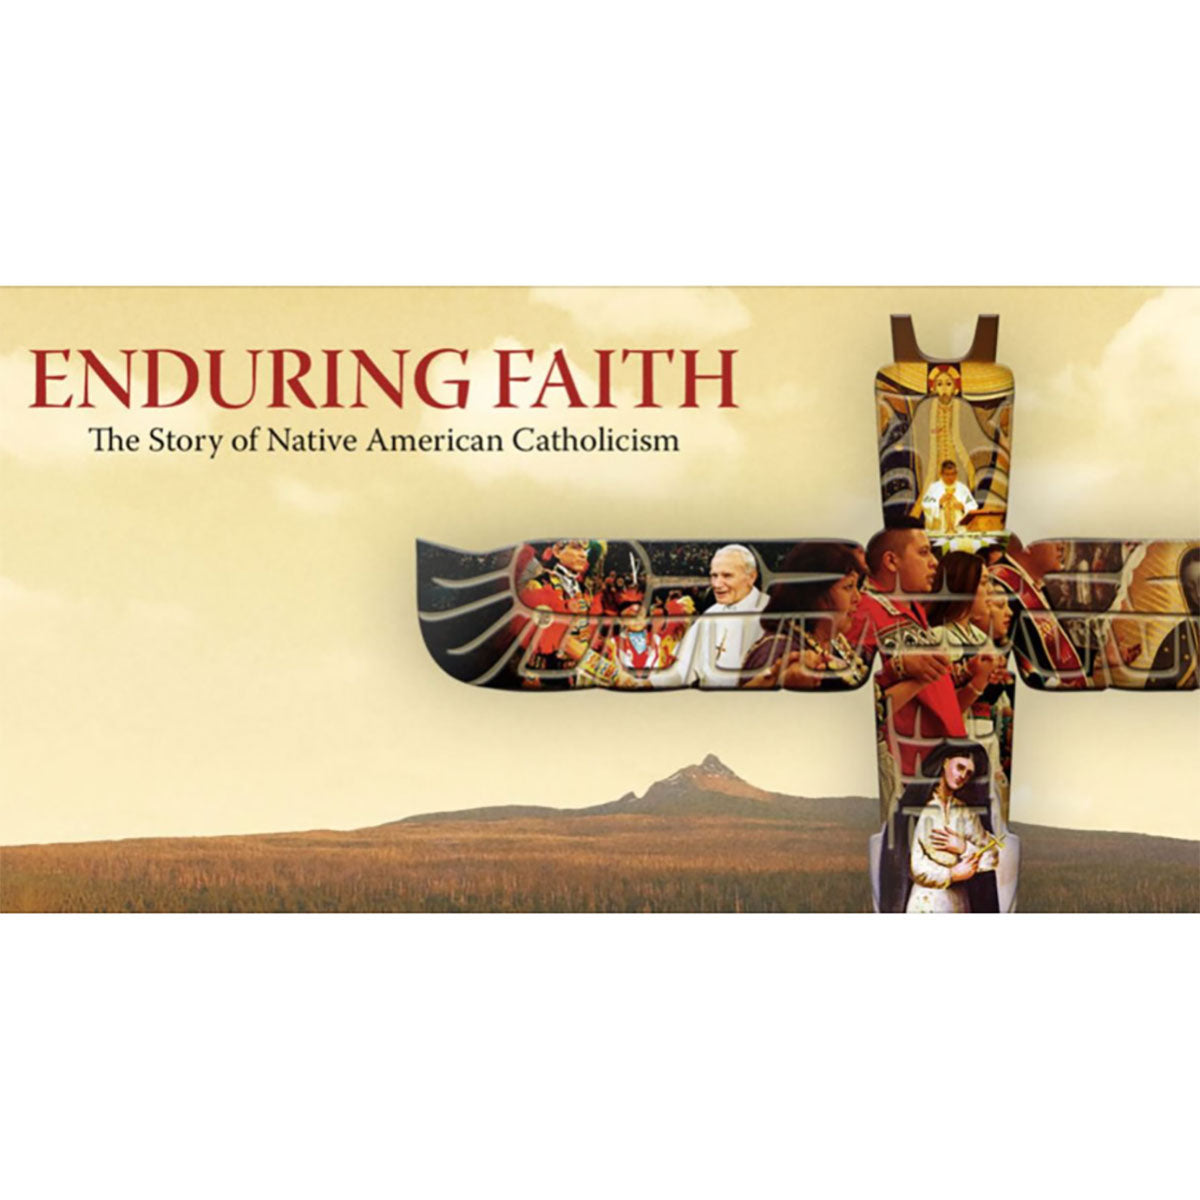 Enduring Faith DVD: The story of Native American Catholics